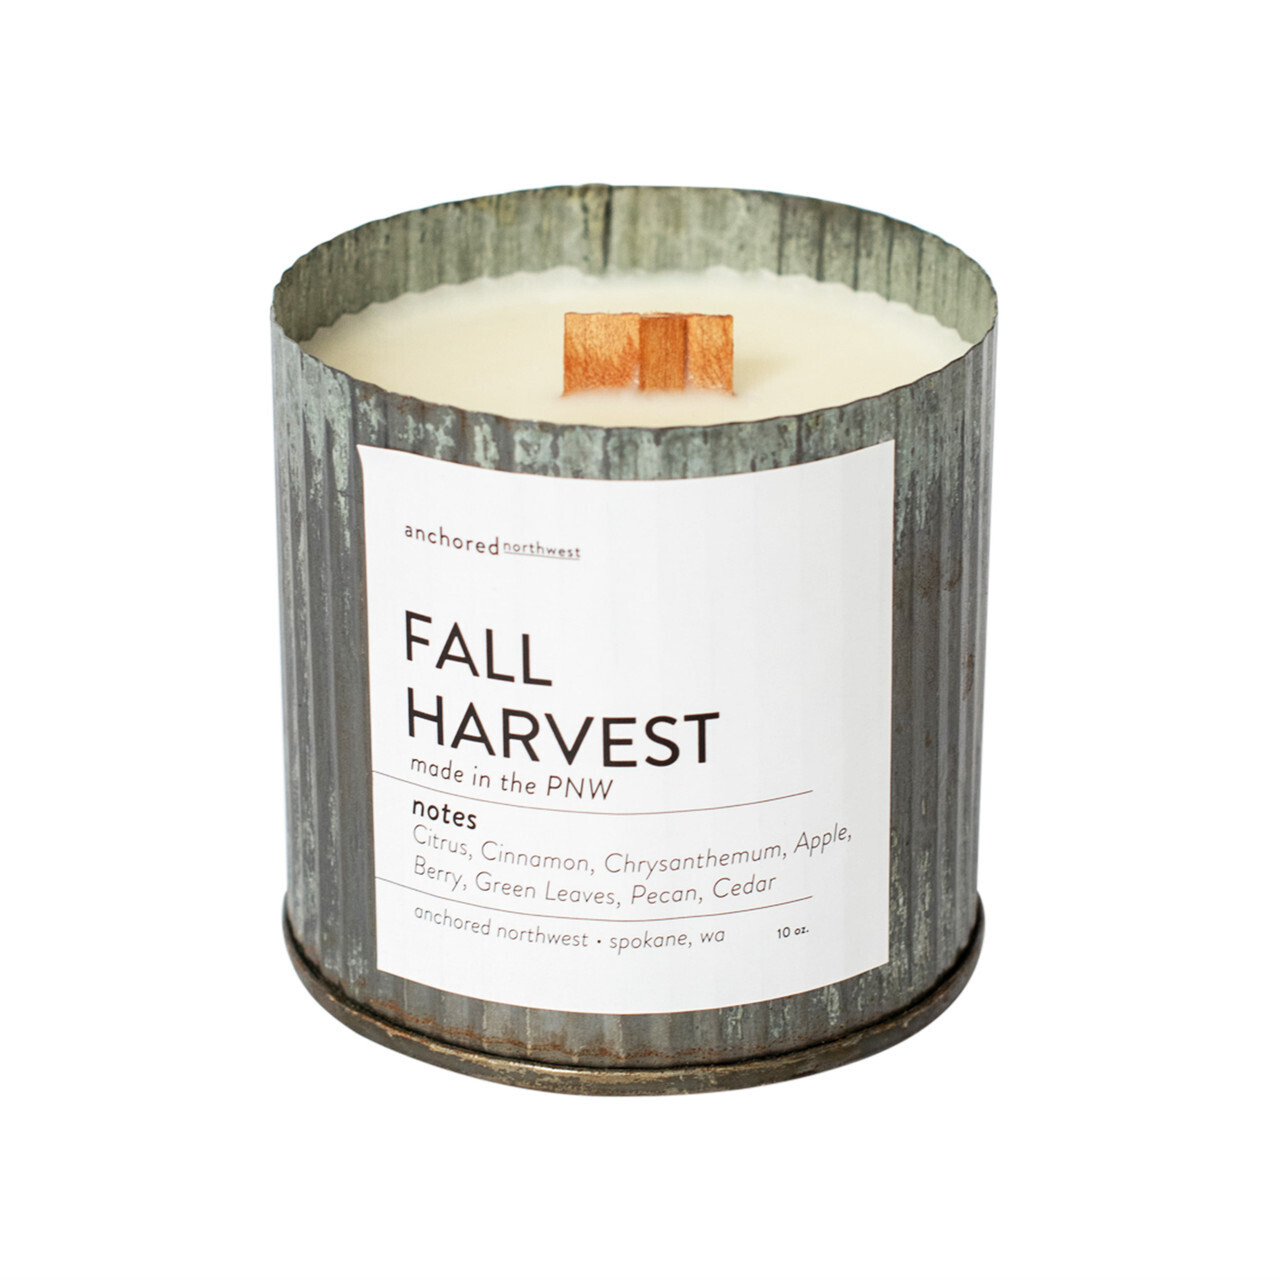 Fall Harvest Rustic Vintage Candle by Anchored Northwest